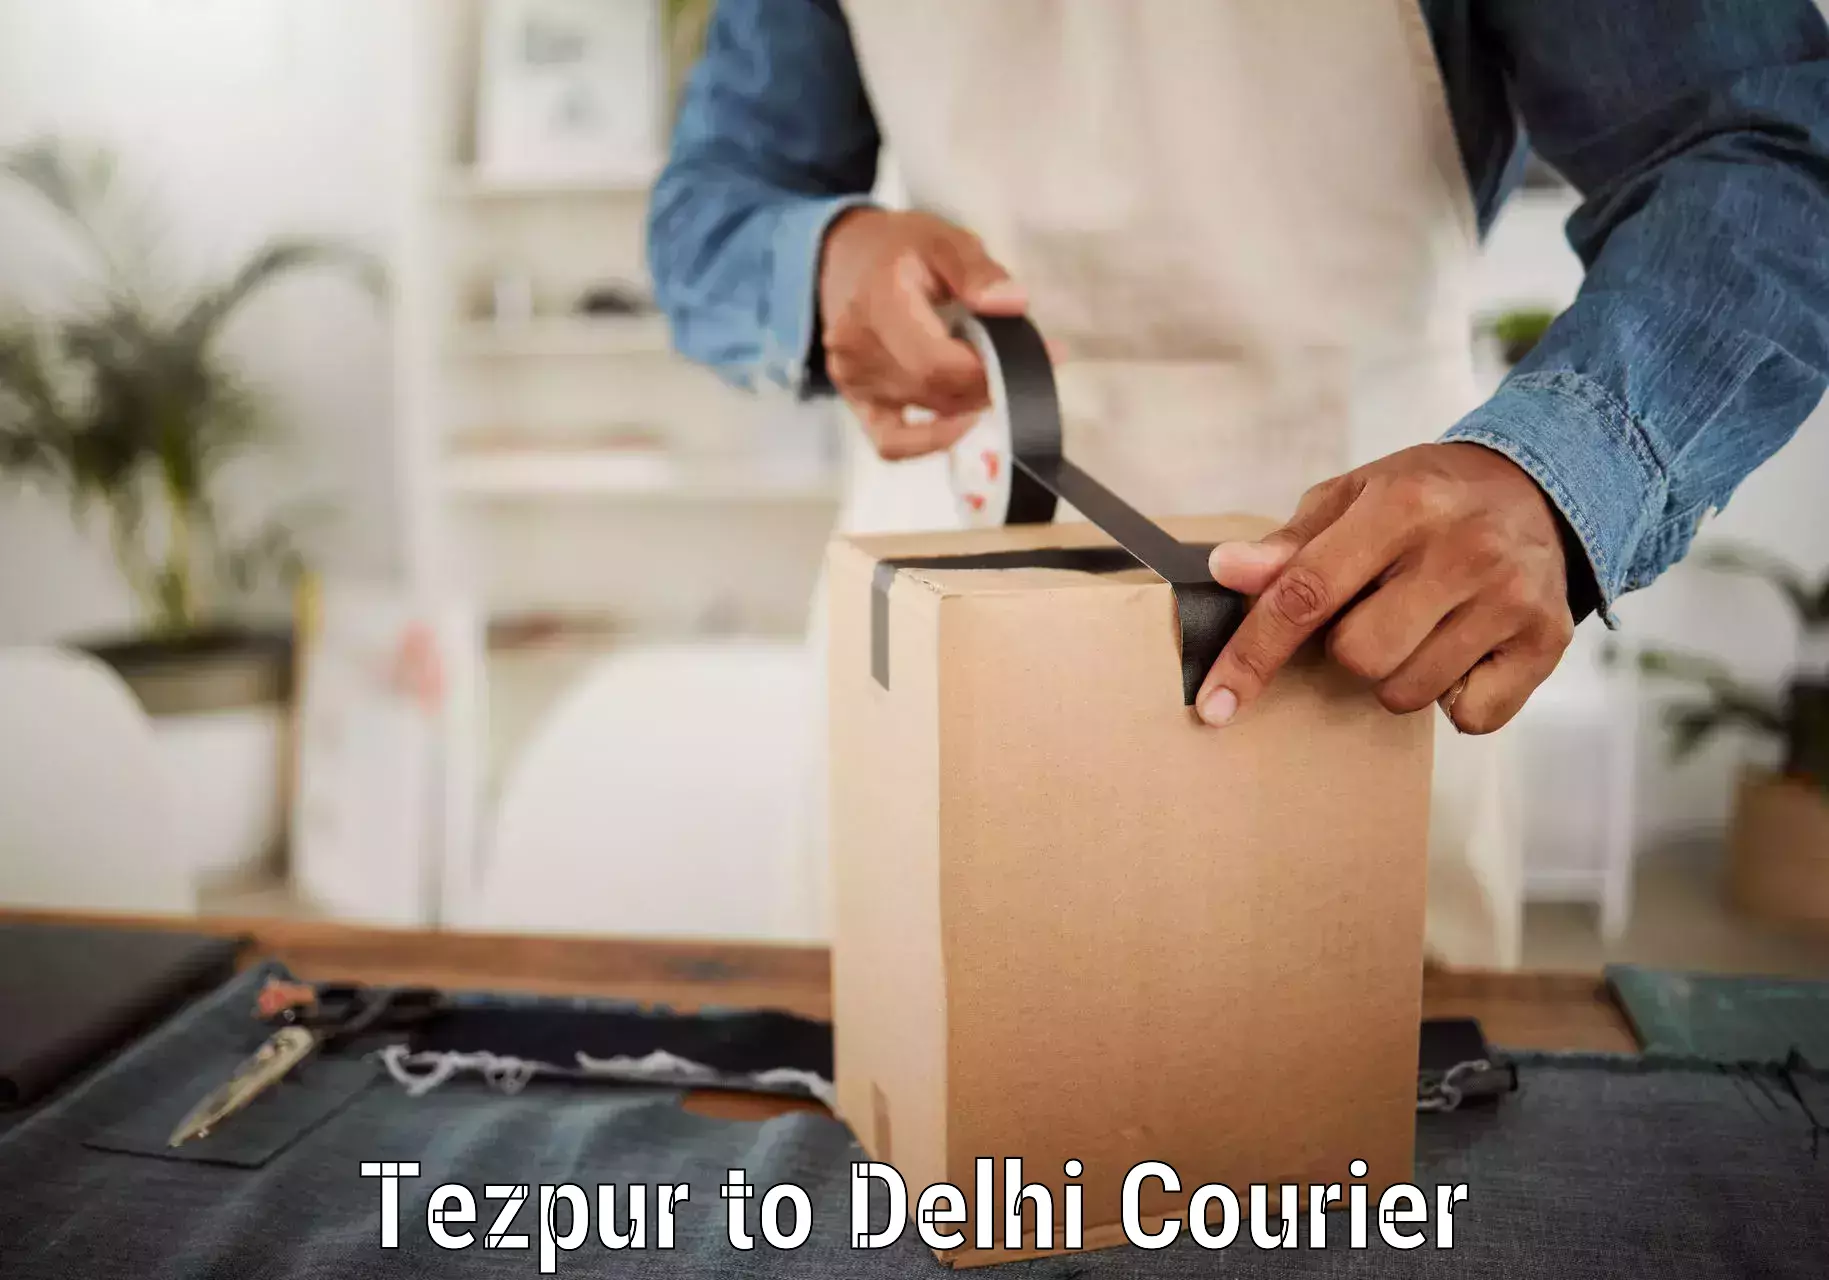 Reliable delivery network Tezpur to University of Delhi